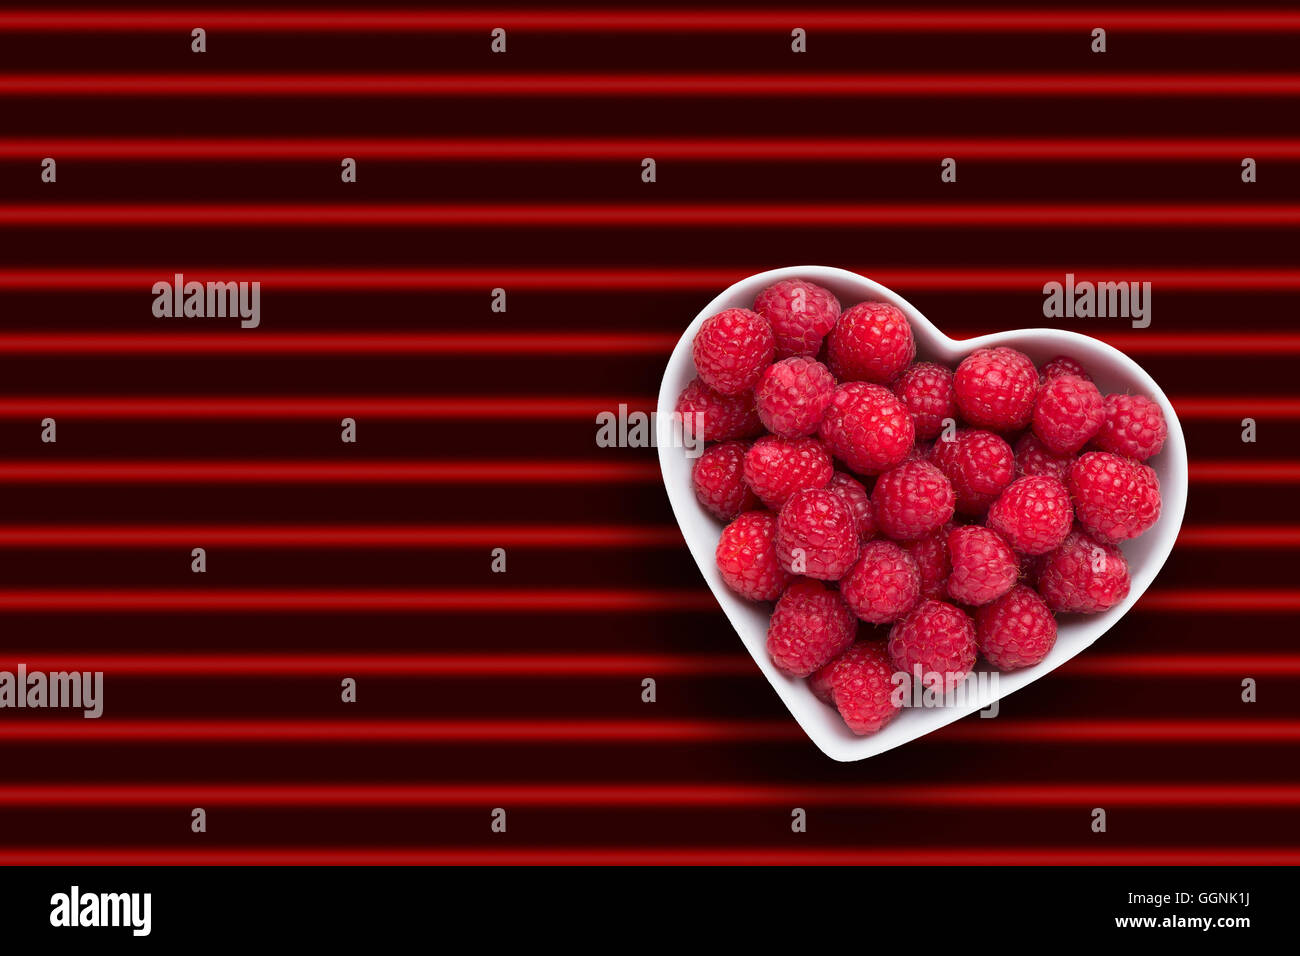 Raspberries in heart-shape bowl on red striped background Stock Photo